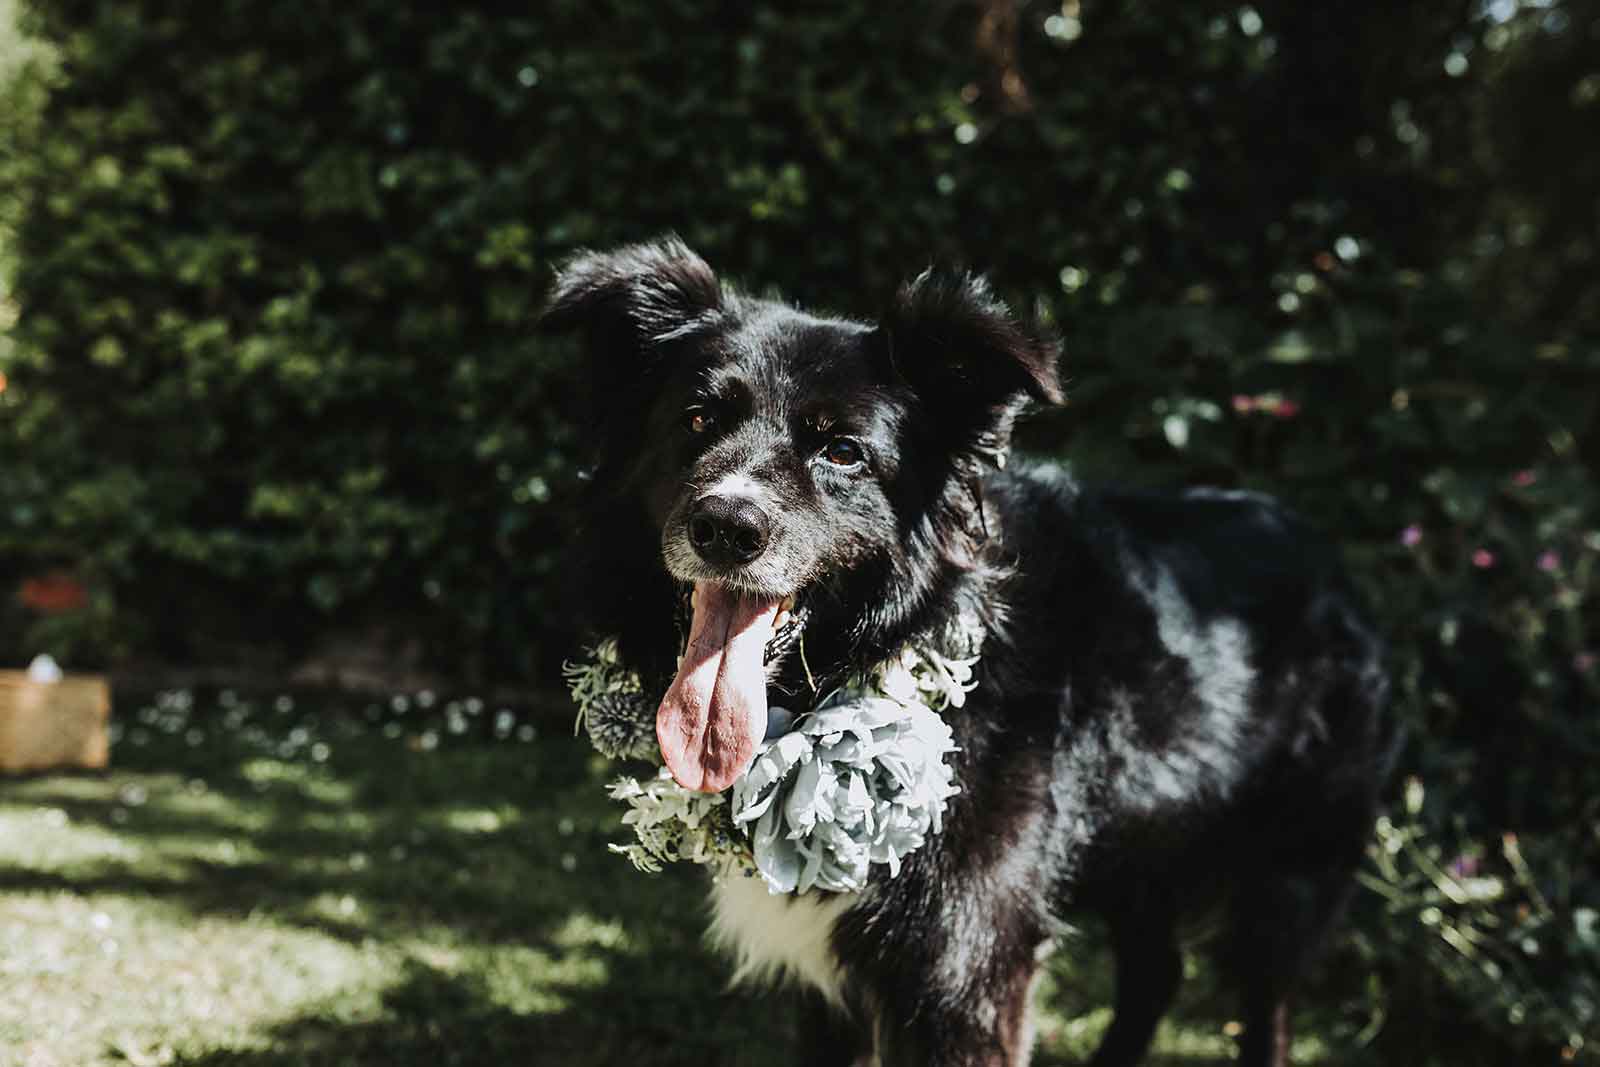 dog with tongue out at wedding venue wearing flower collar crown